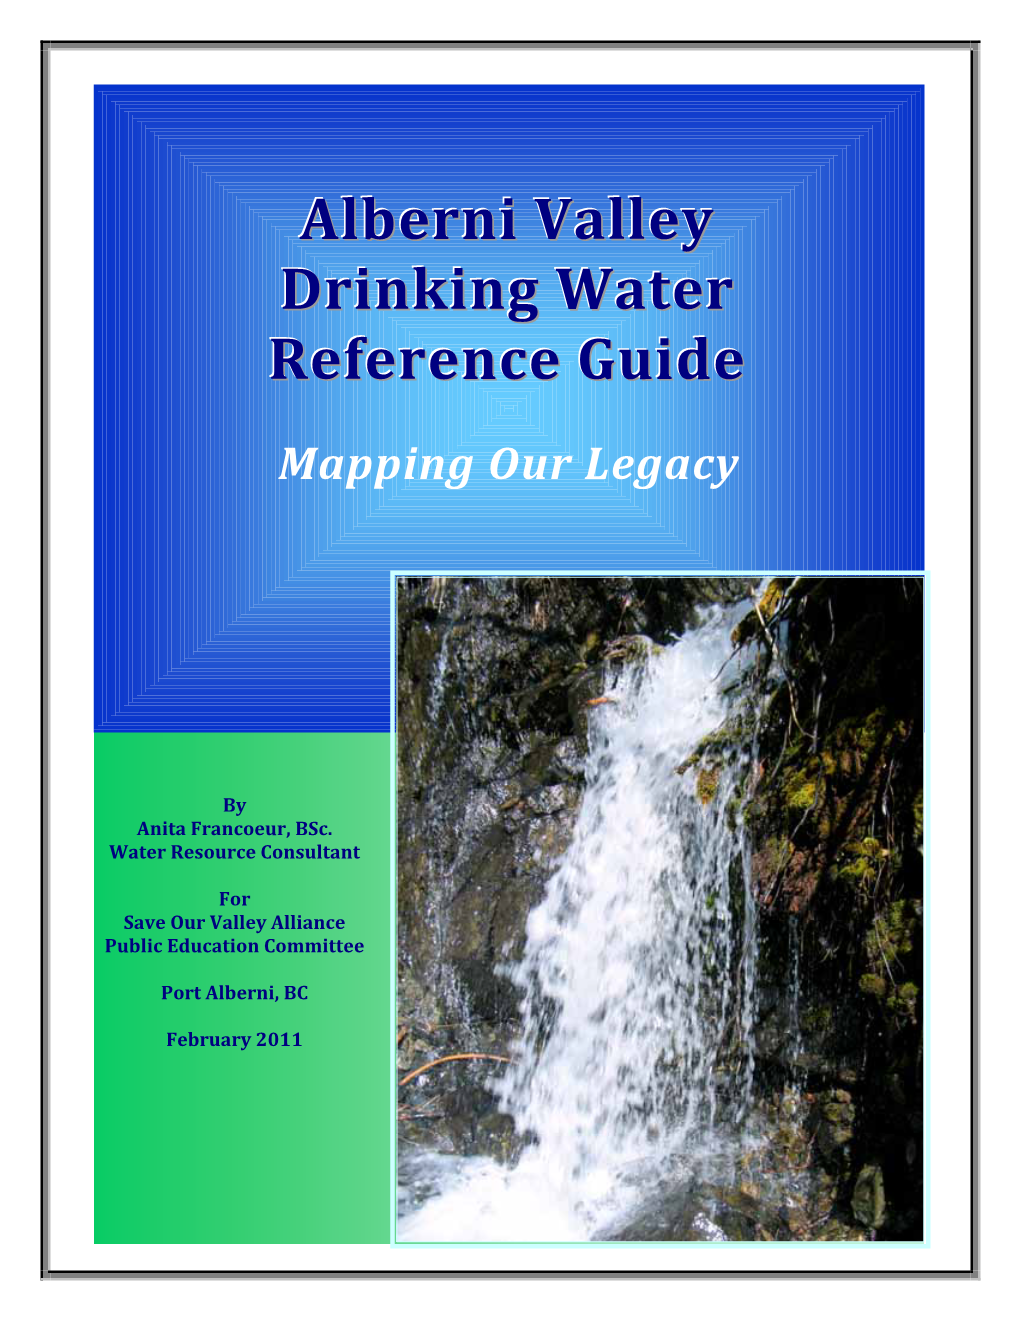 Alberni Valley Drinking Water Reference Guide, February 2011 I Executive Summary